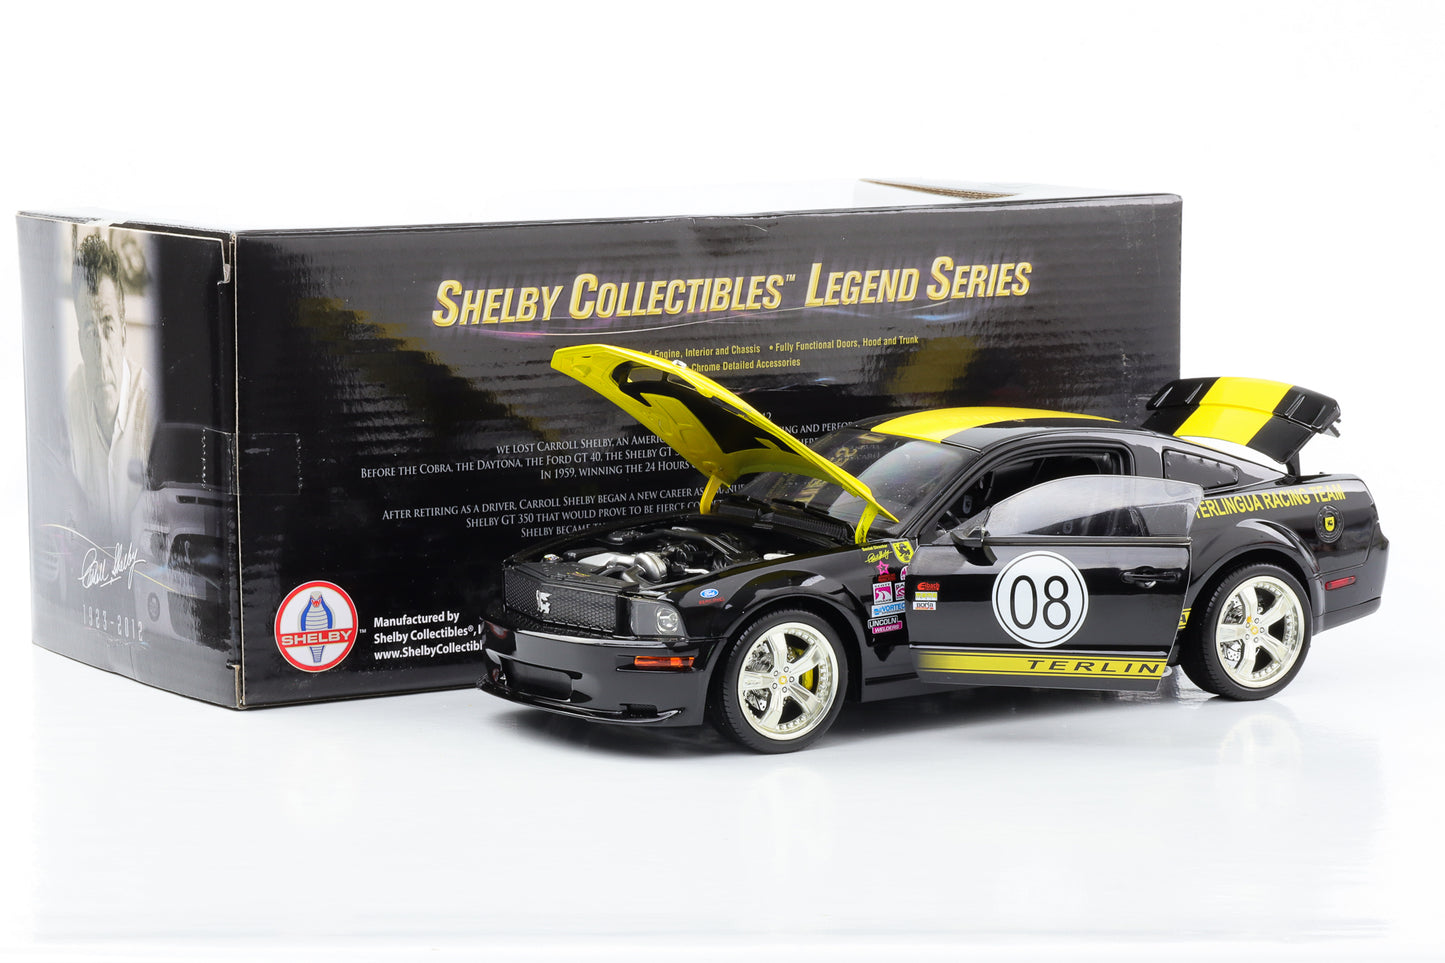 1:18 2008 Shelby Mustang Terlingua #08 black yellow Shelby Collectibles